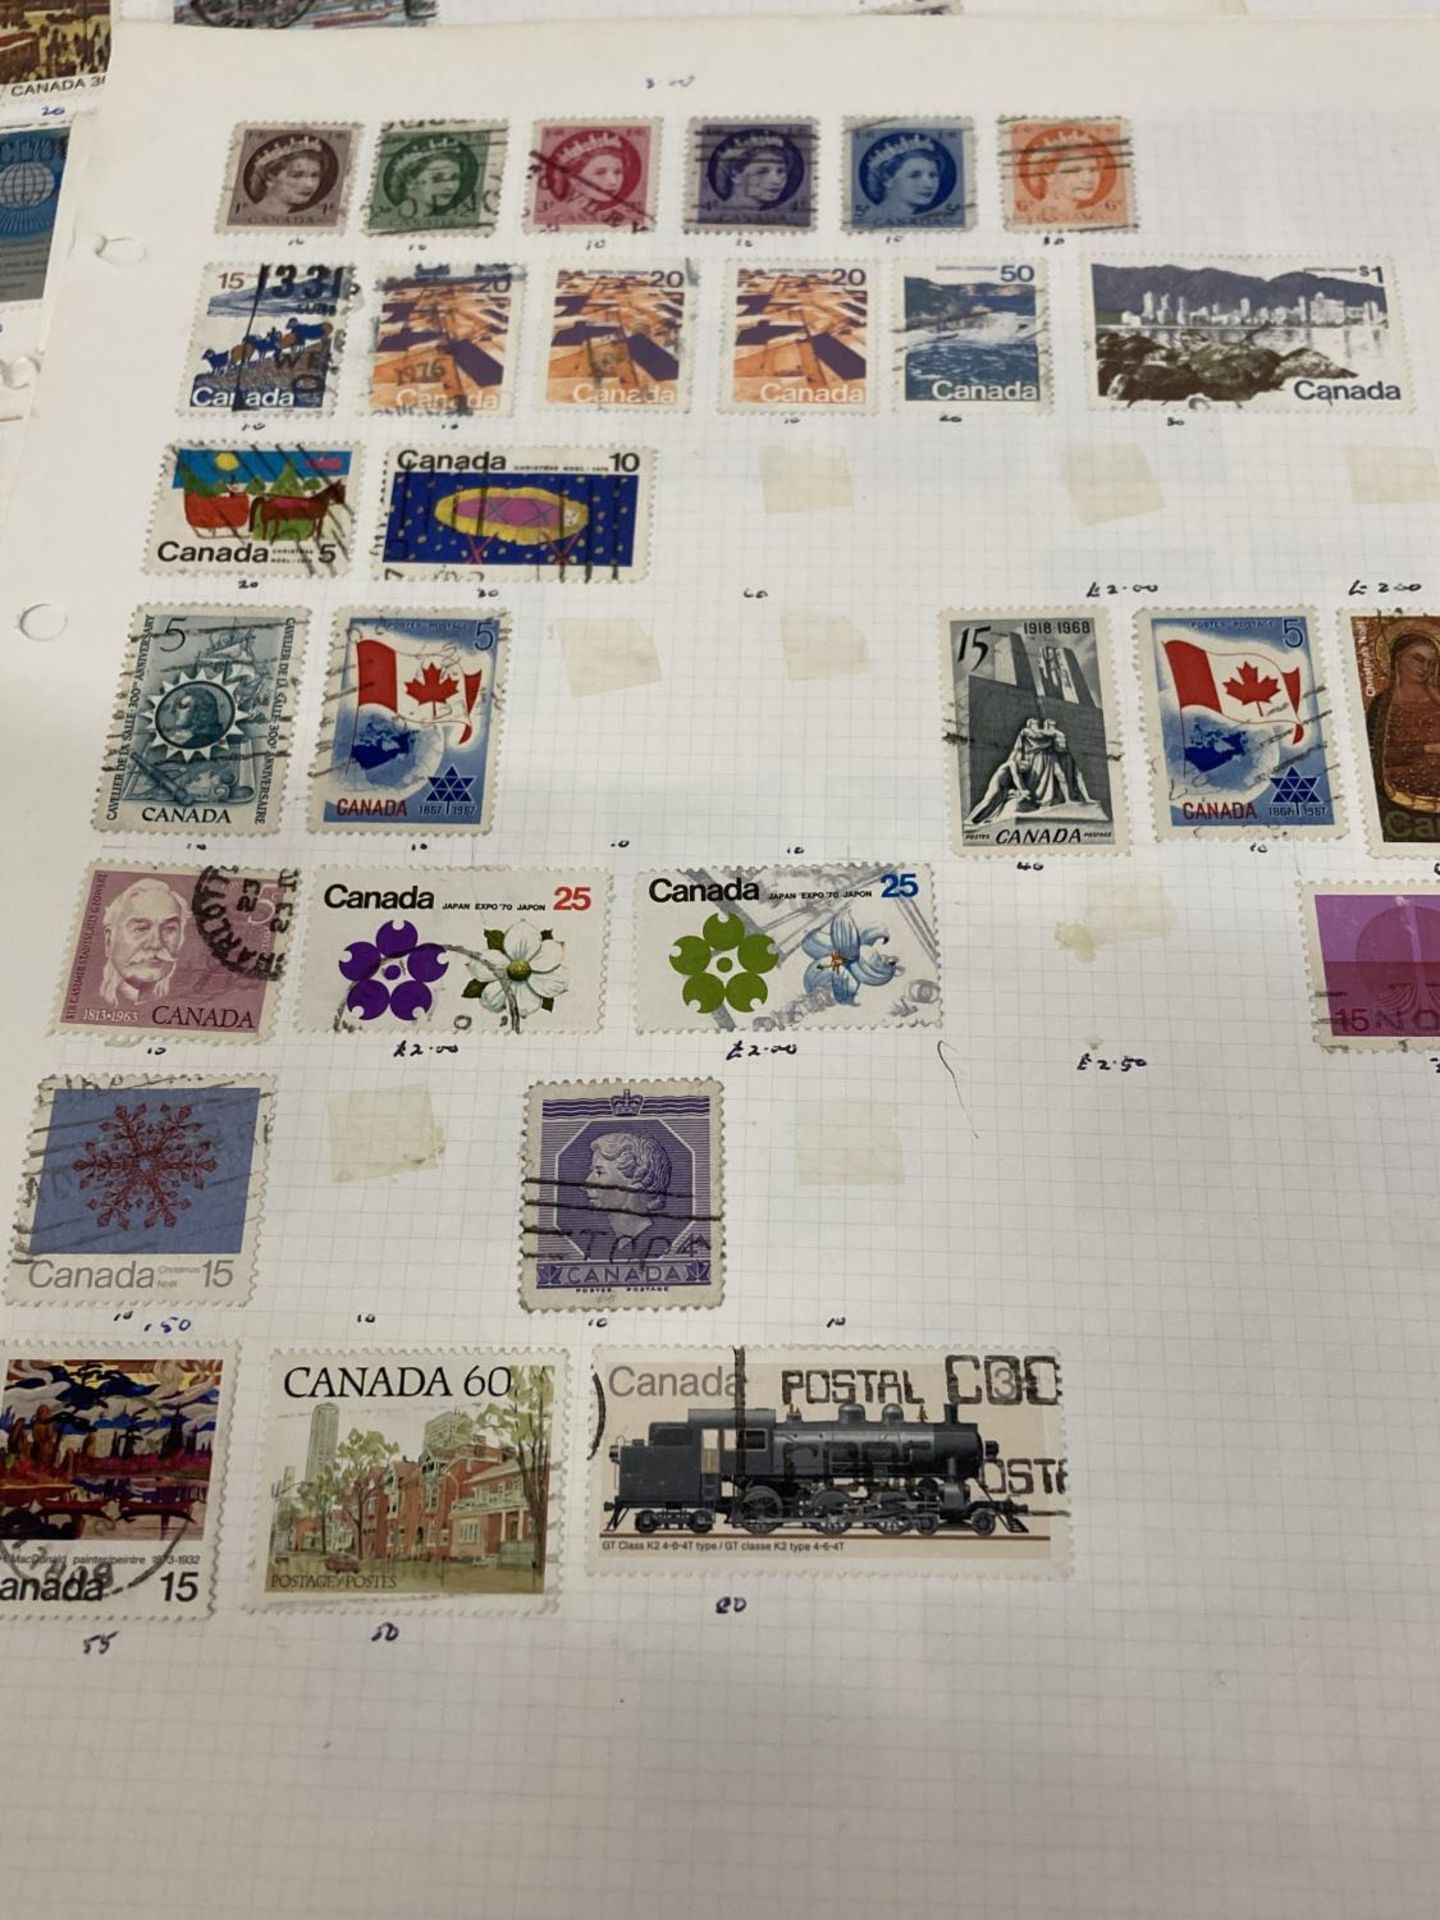 TEN PLUS SHEETS CONTAINING STAMPS FROM CANADA - Image 7 of 7